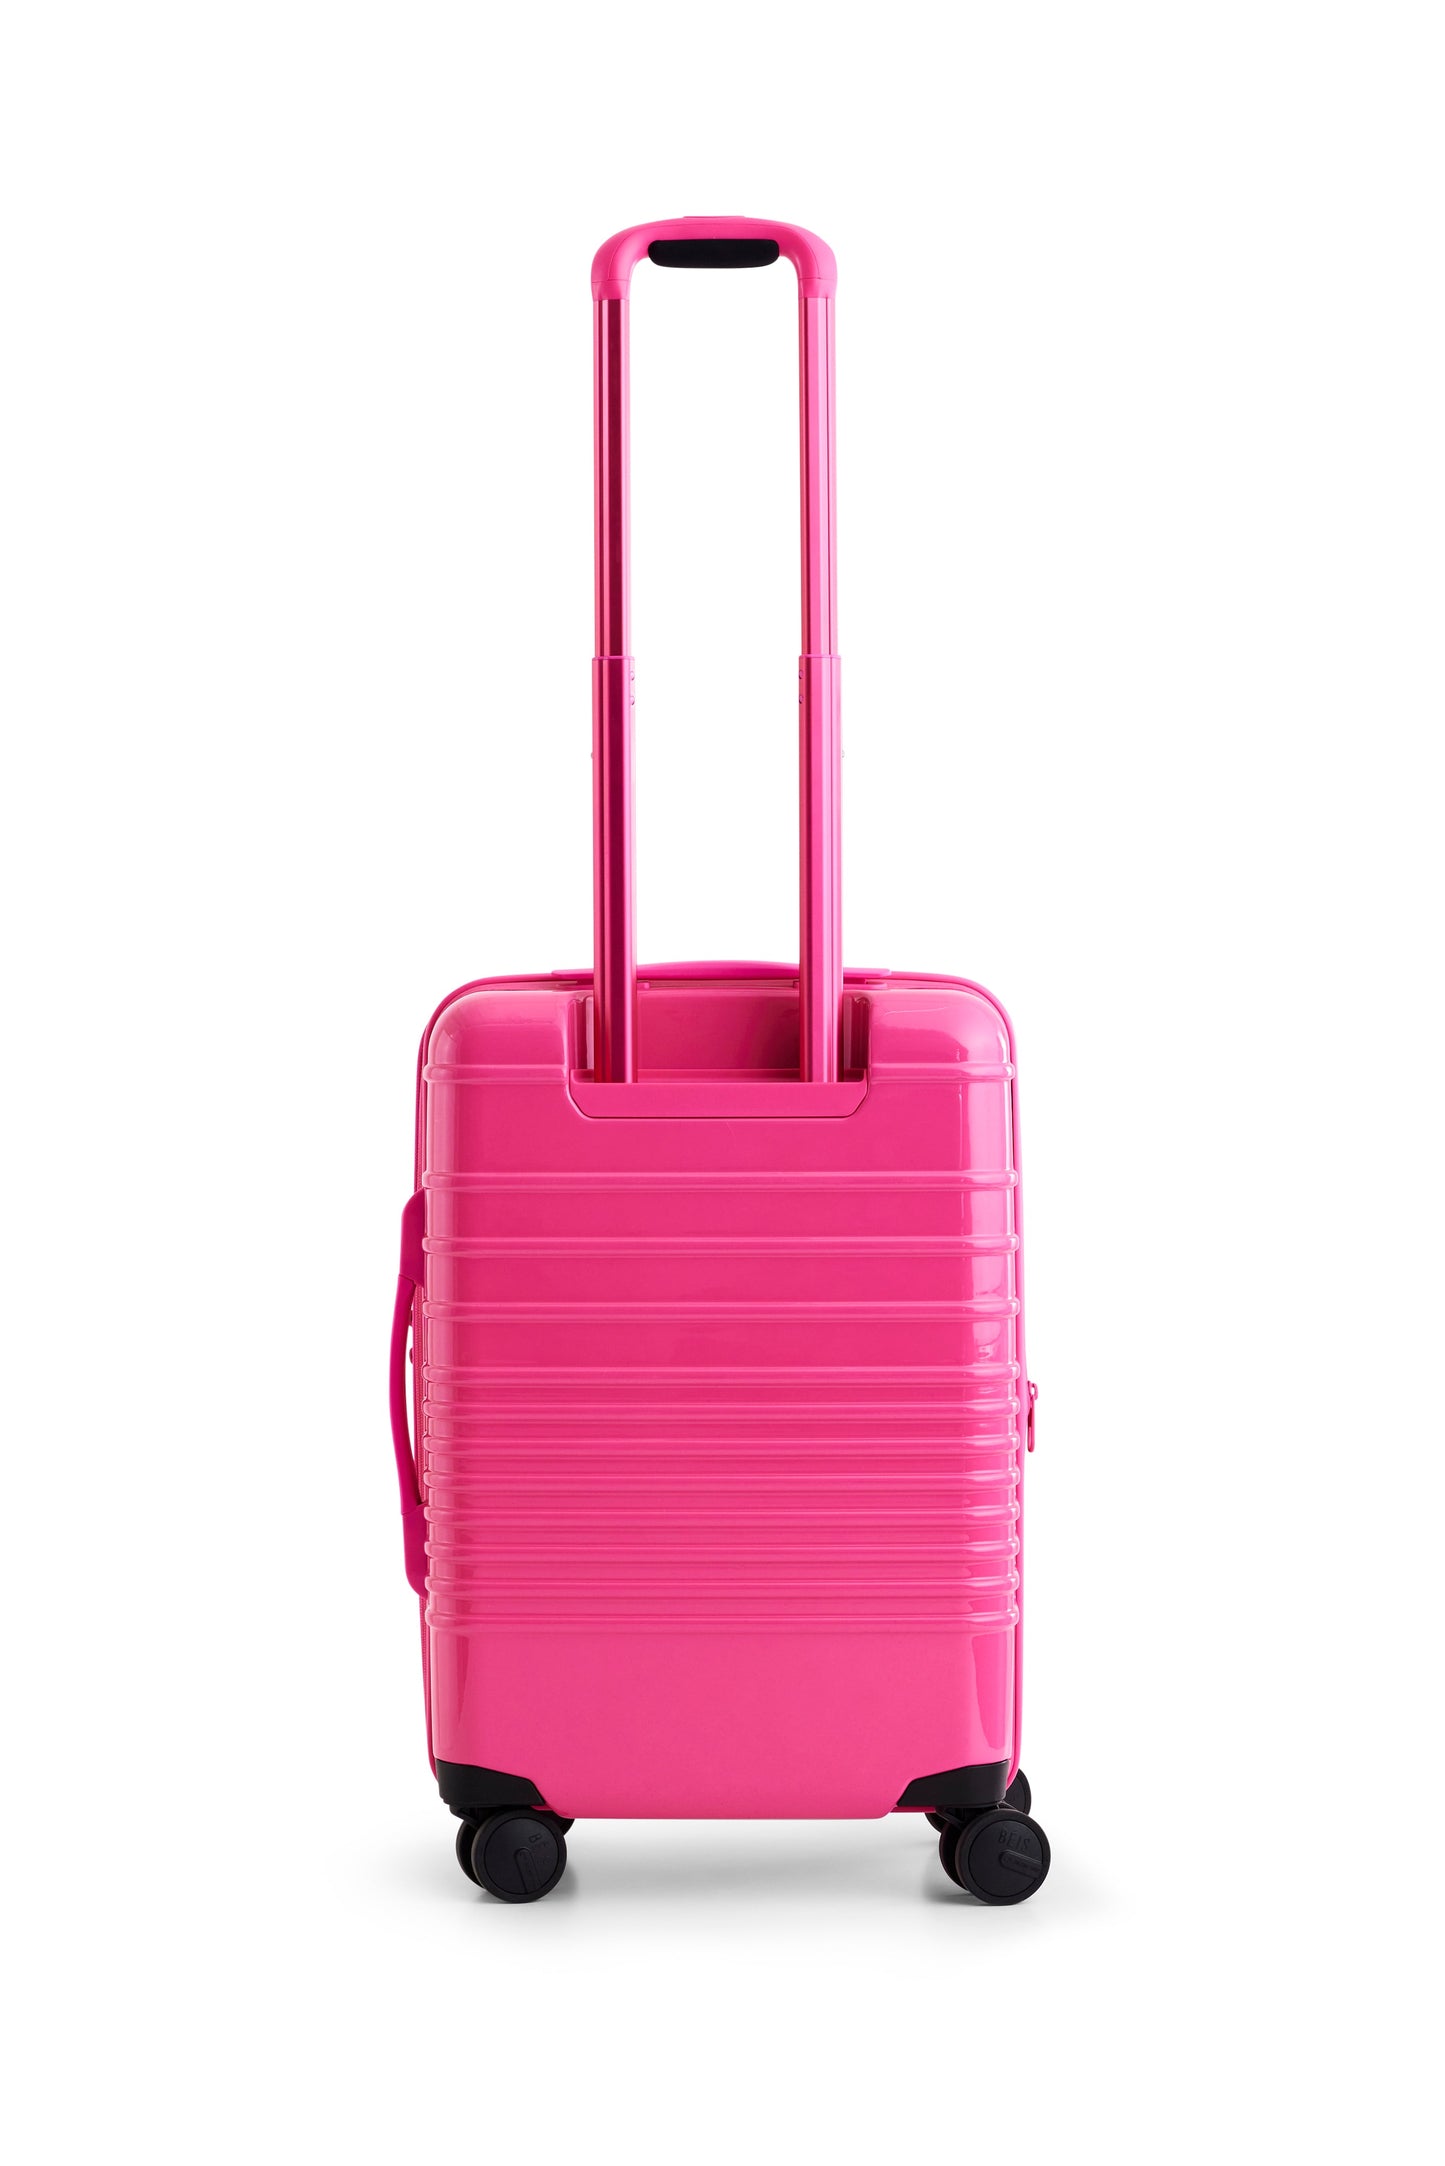 The Carry-On Roller in Barbie™ Pink